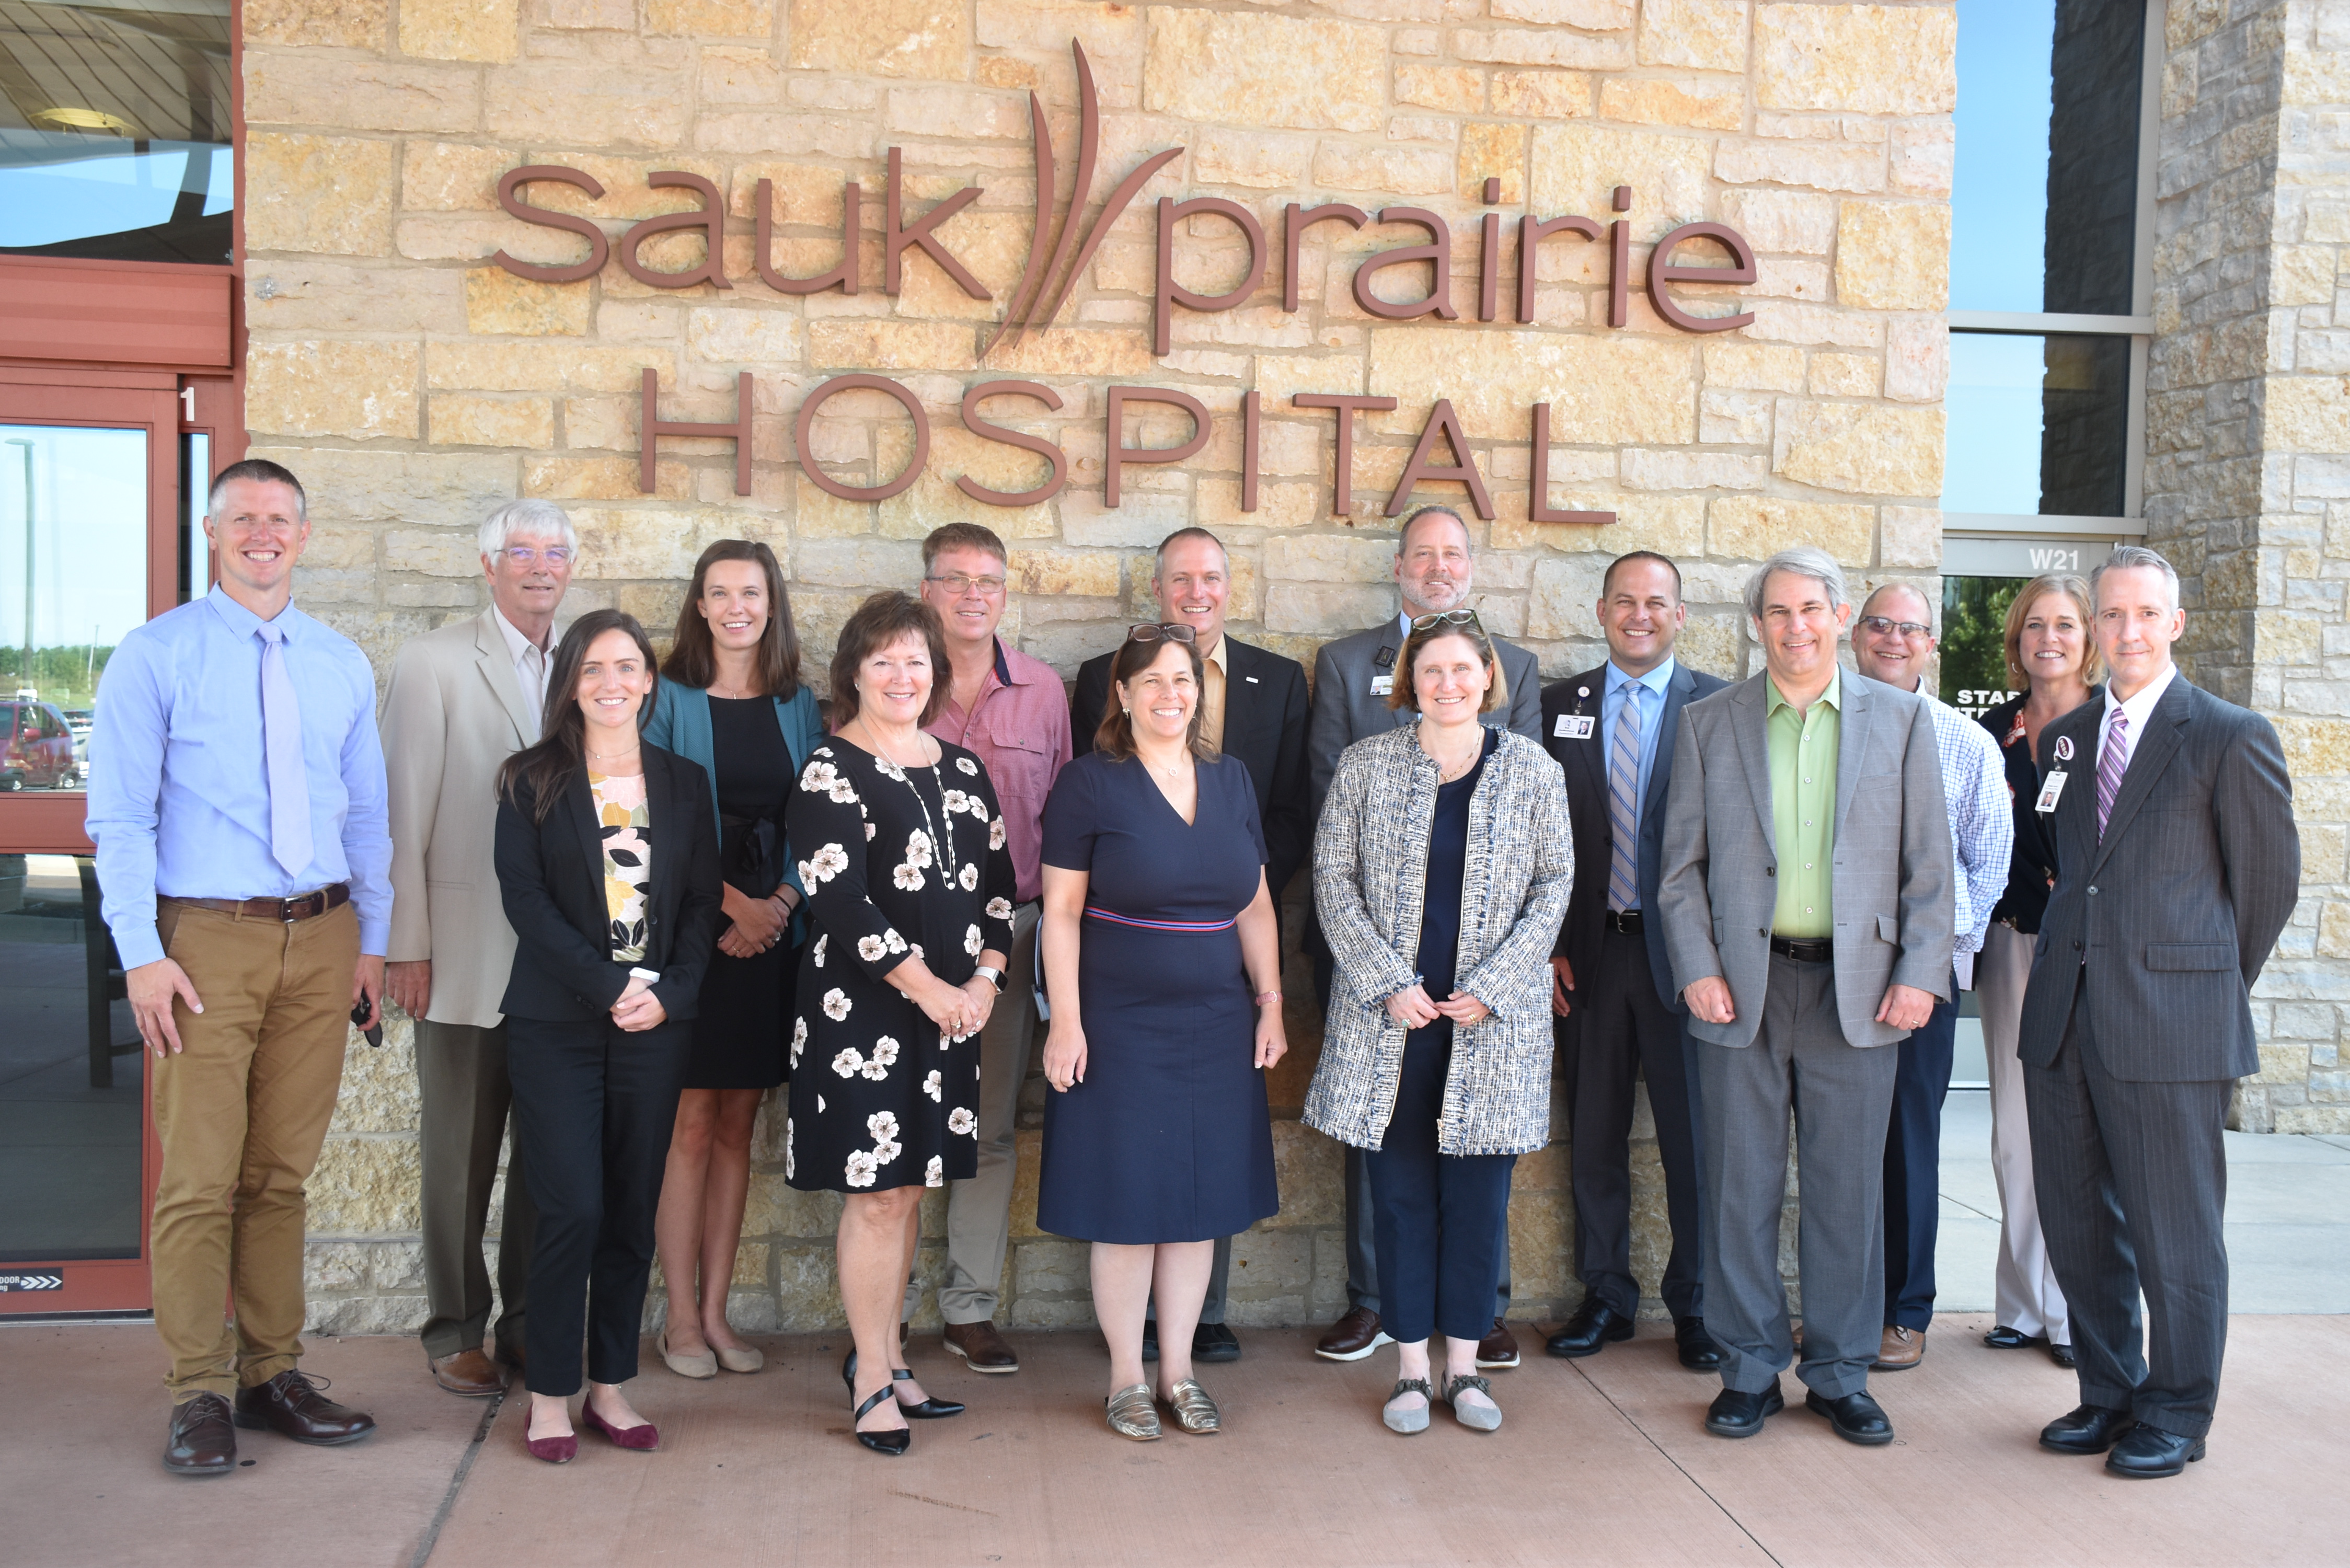 Sauk Prairie Healthcare hosts visitors from Federal Reserve Bank